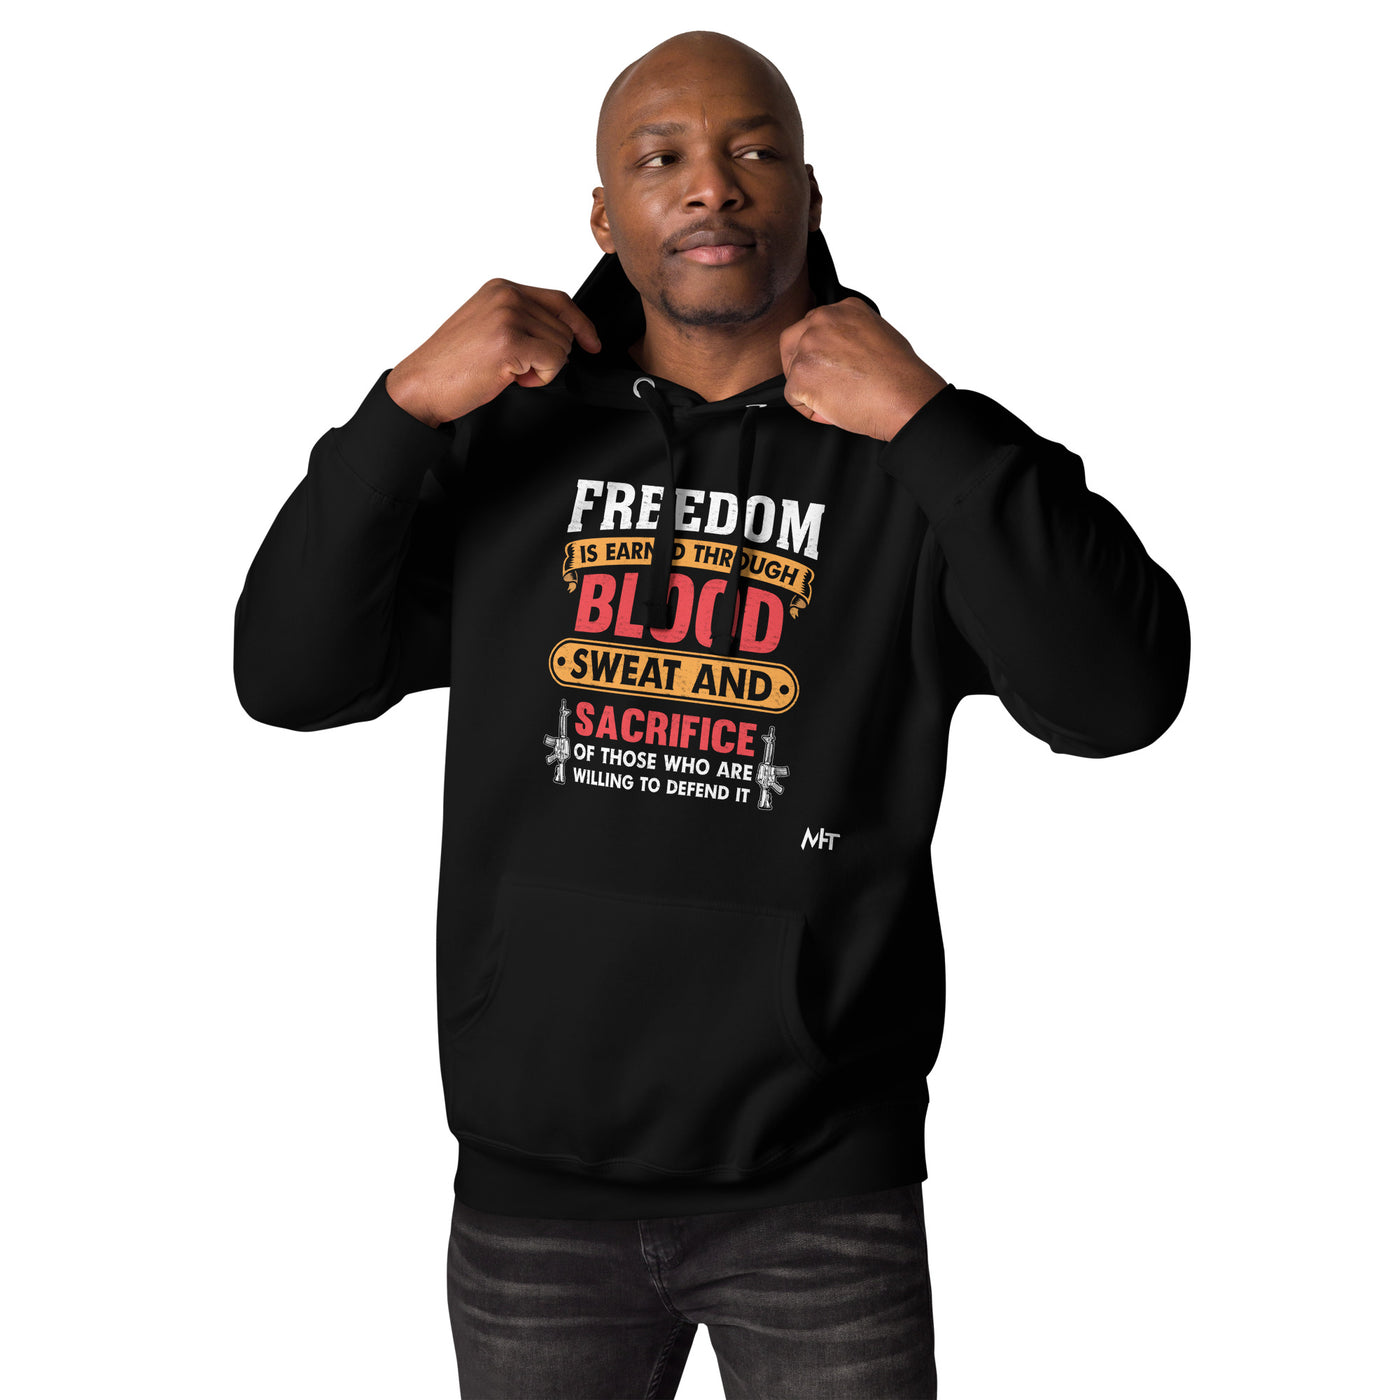 Freedom is earned through Blood, Sweat and Sacrifice - Unisex Hoodie